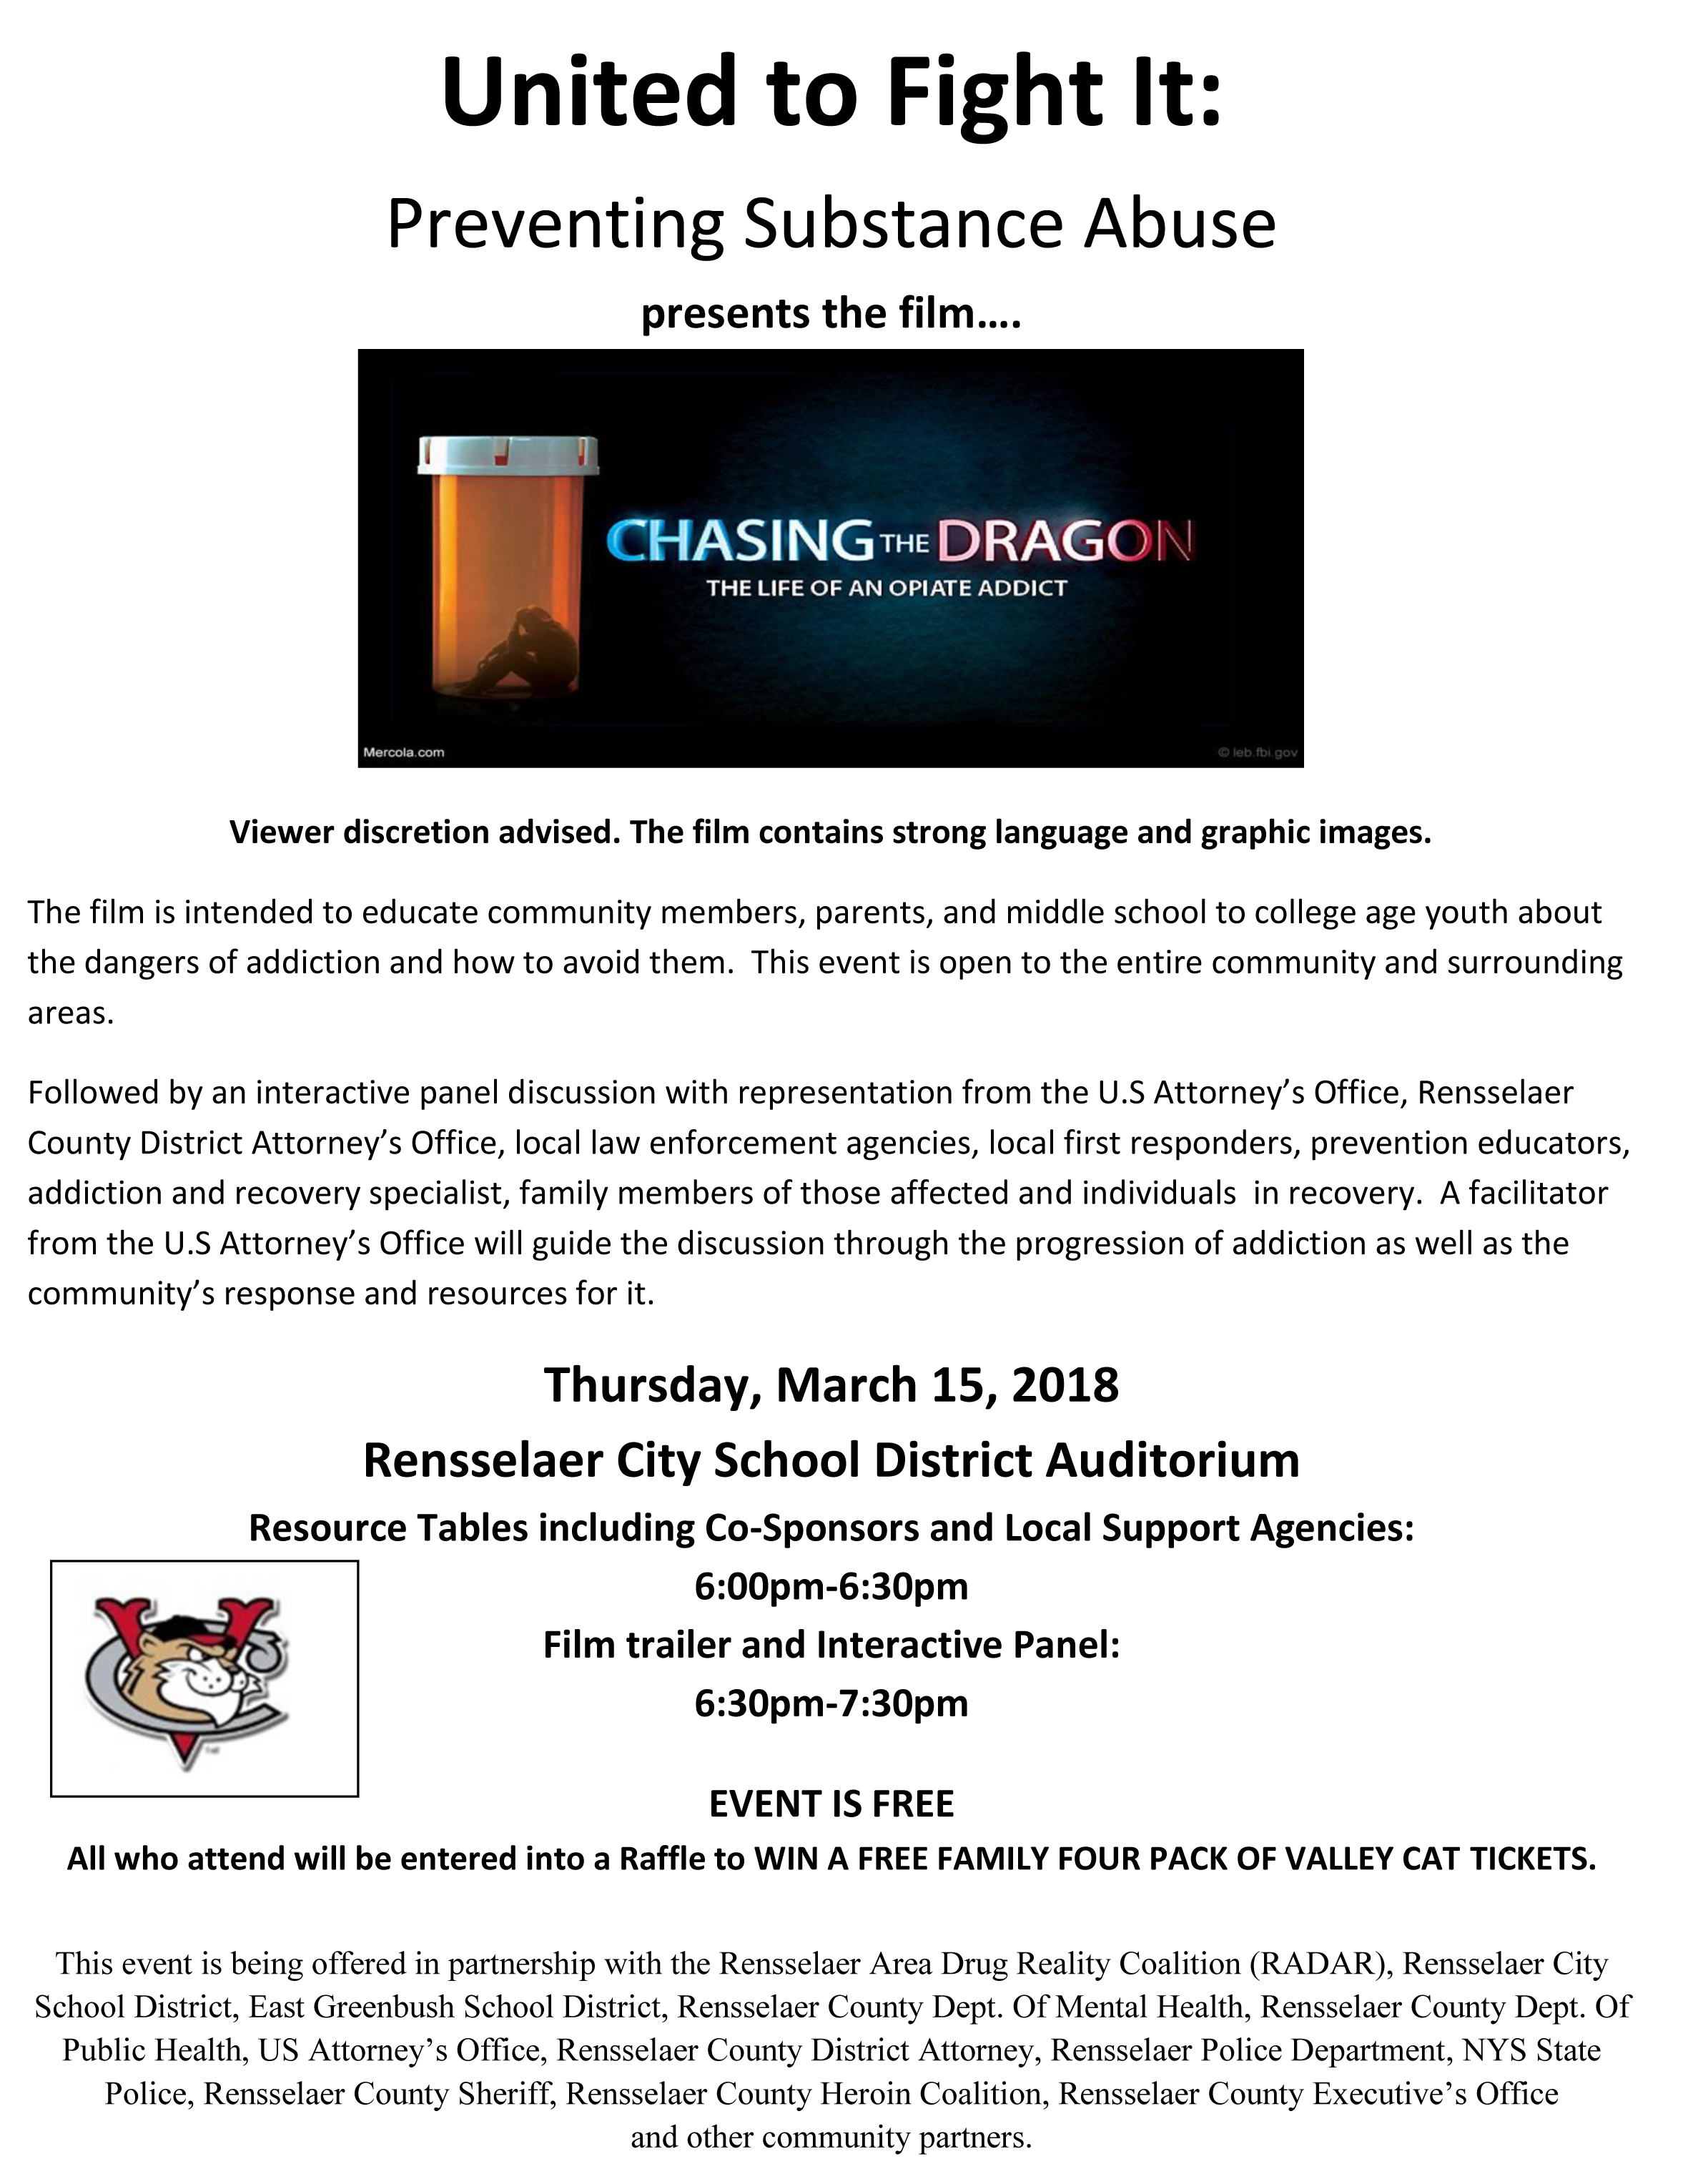 Chasing the Dragon Flyer